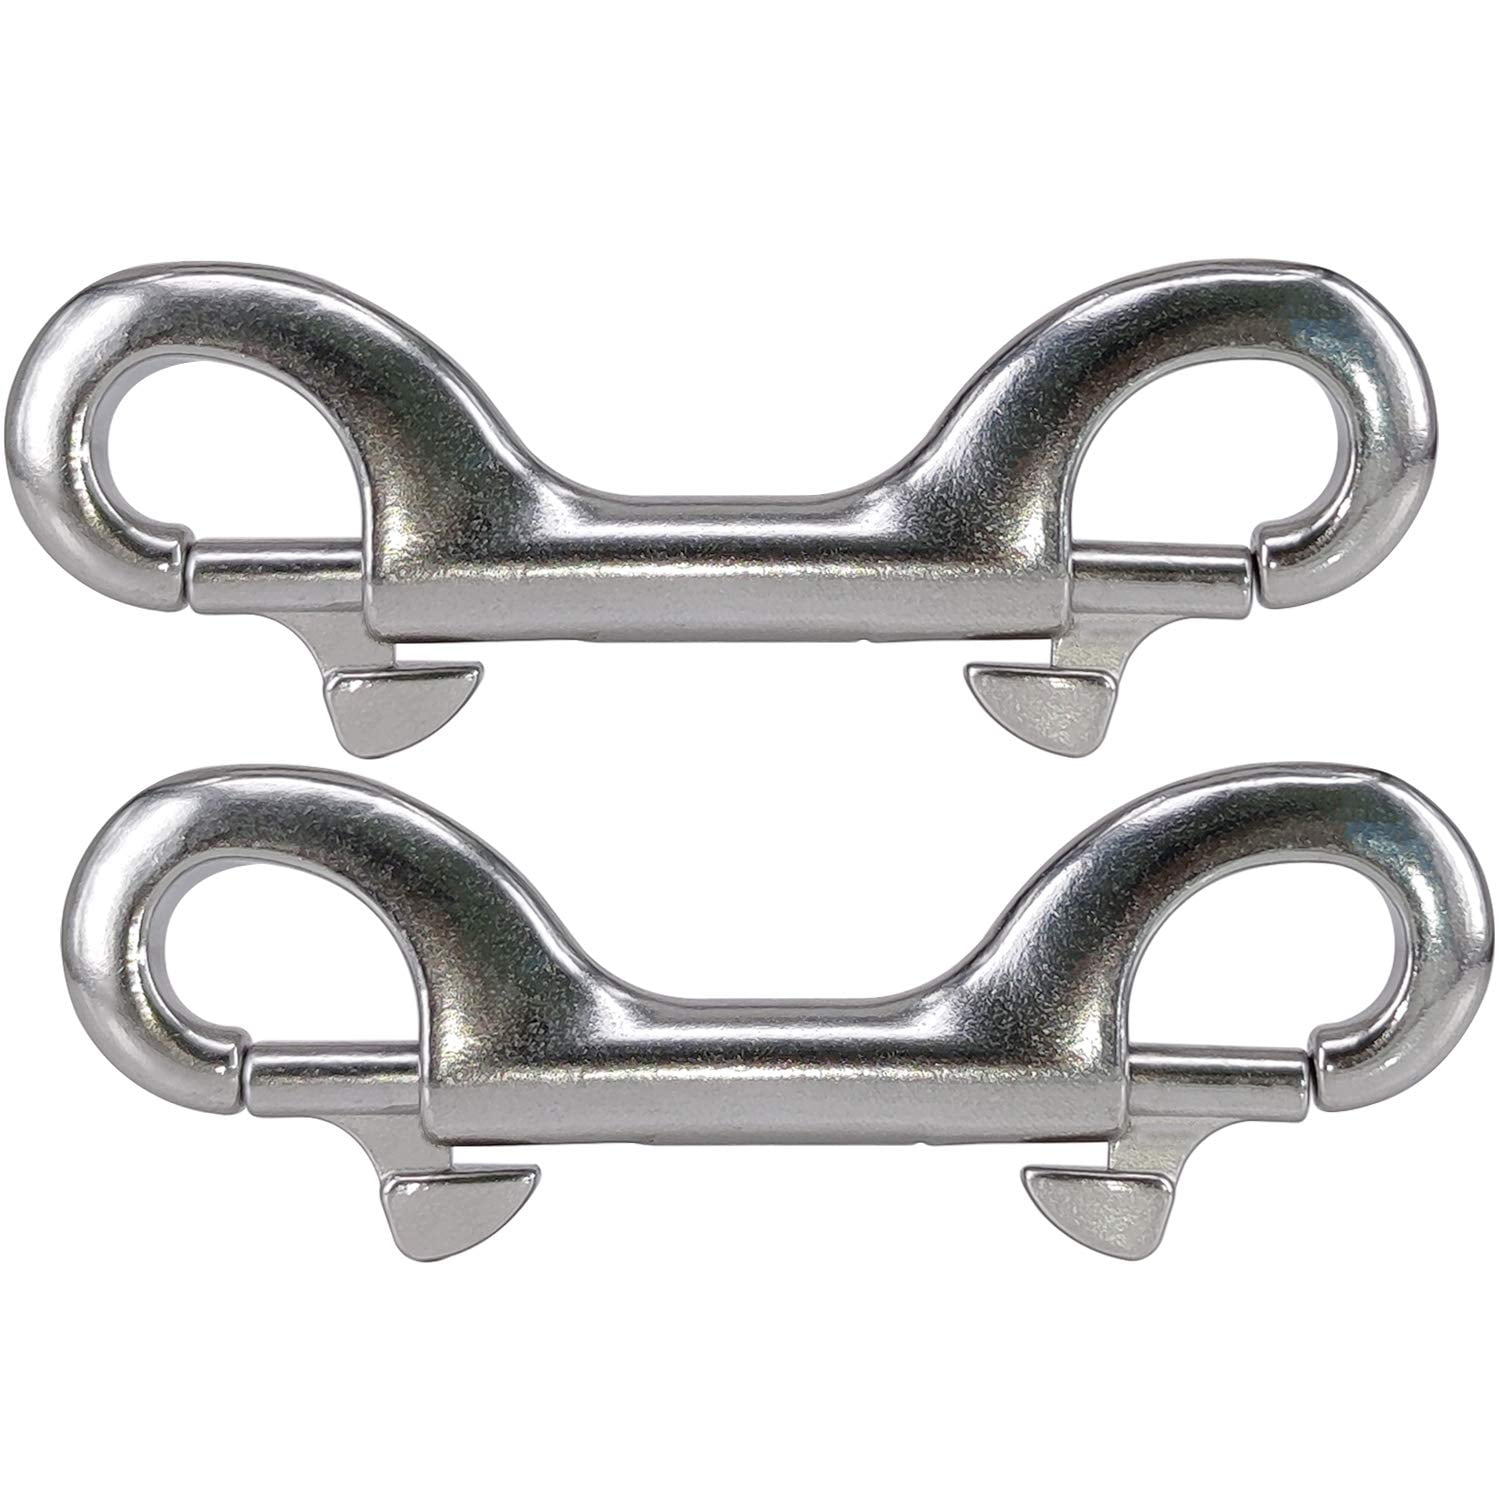 Double Ended Bolt Snap Hook, 2-Pack 3-1/2 in 316 Stainless Steel Marine  Grade Double End Trigger Snaps Metal Clips for Diving, Dog Leash, Key Chain,  Horse Tack, Pet Feed Buckets 